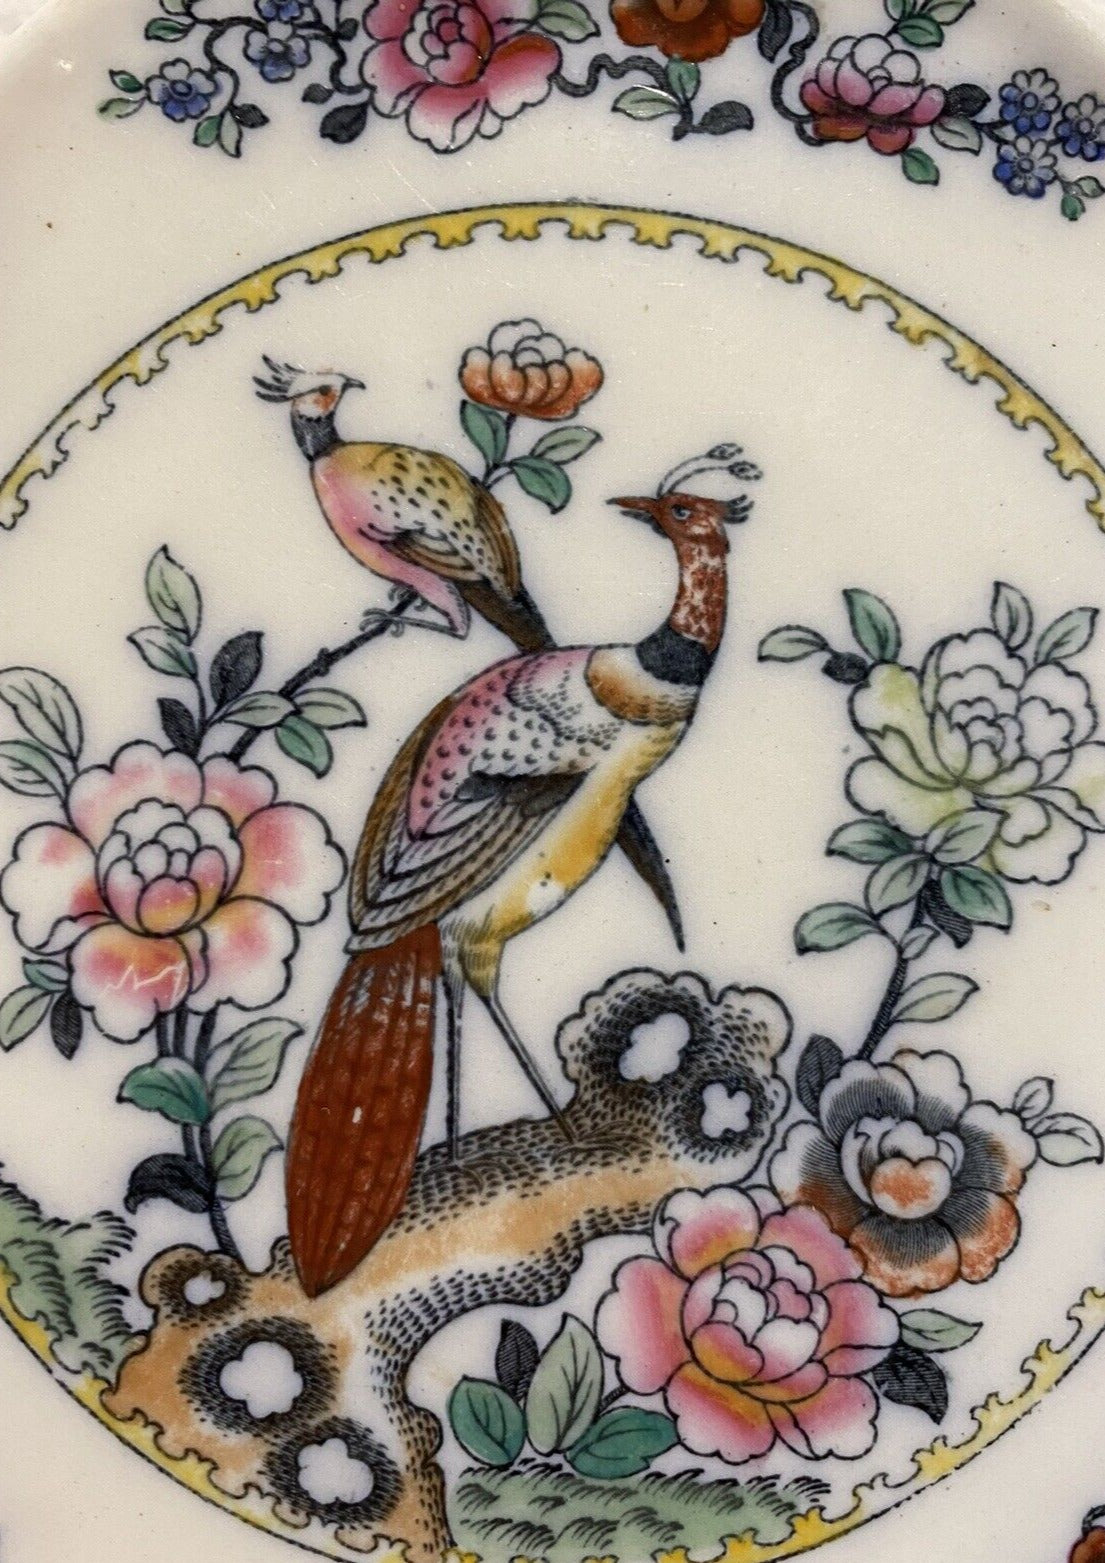 Antique trivet made by Whieldon Ware Old Chelsea #WhieldonWareOldChelse #RareTrivet #AntiqueChinoiseriePlates - DharBazaar